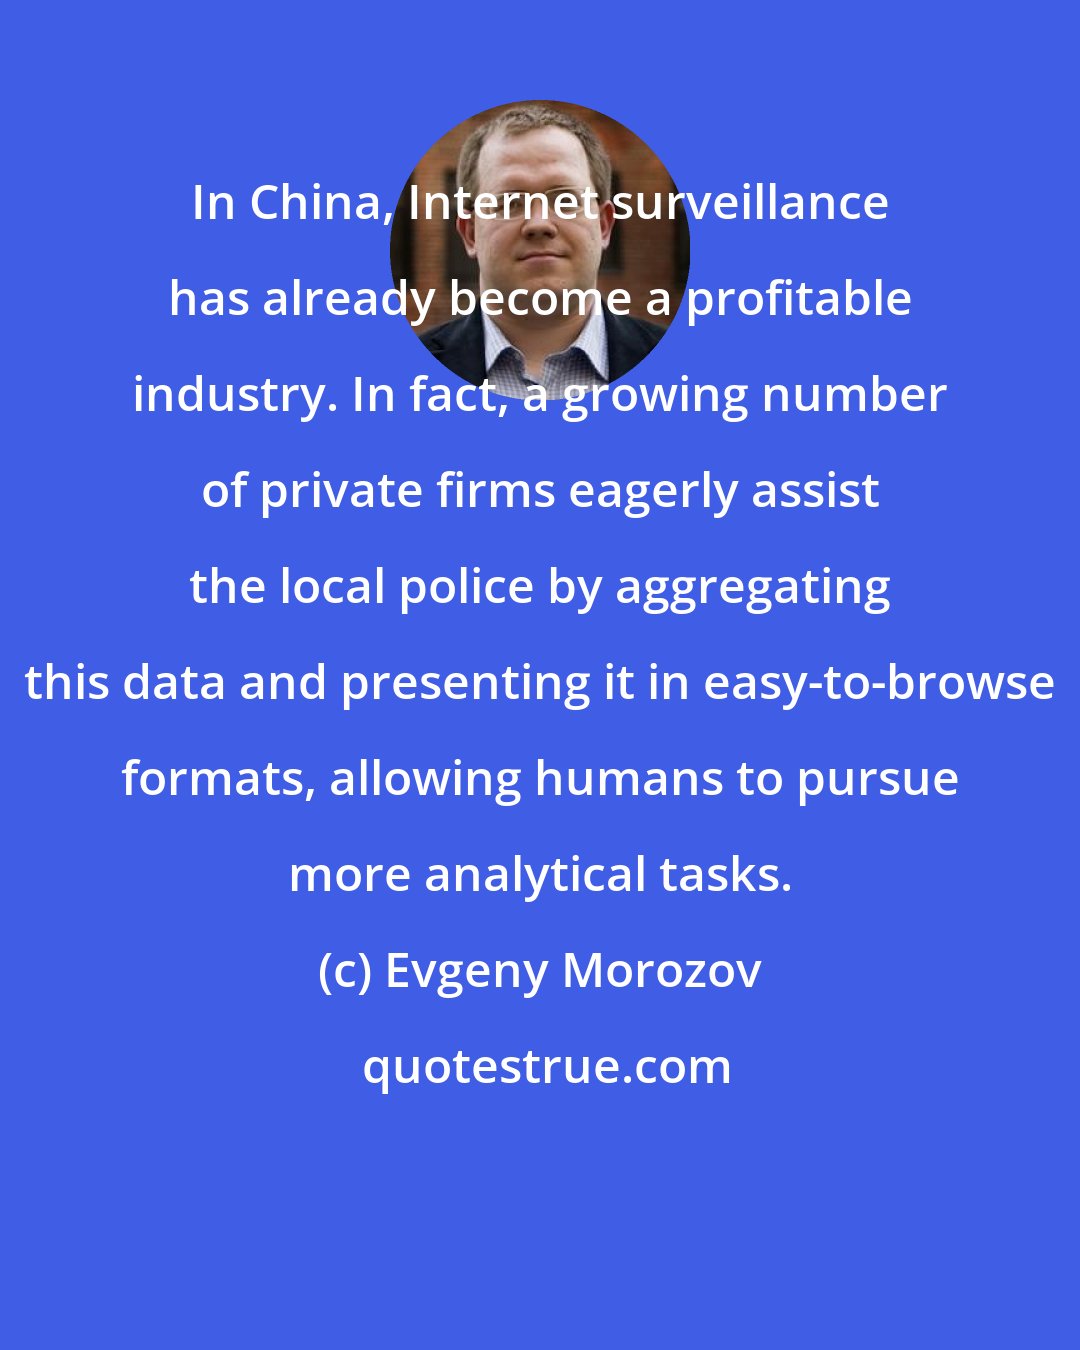 Evgeny Morozov: In China, Internet surveillance has already become a profitable industry. In fact, a growing number of private firms eagerly assist the local police by aggregating this data and presenting it in easy-to-browse formats, allowing humans to pursue more analytical tasks.